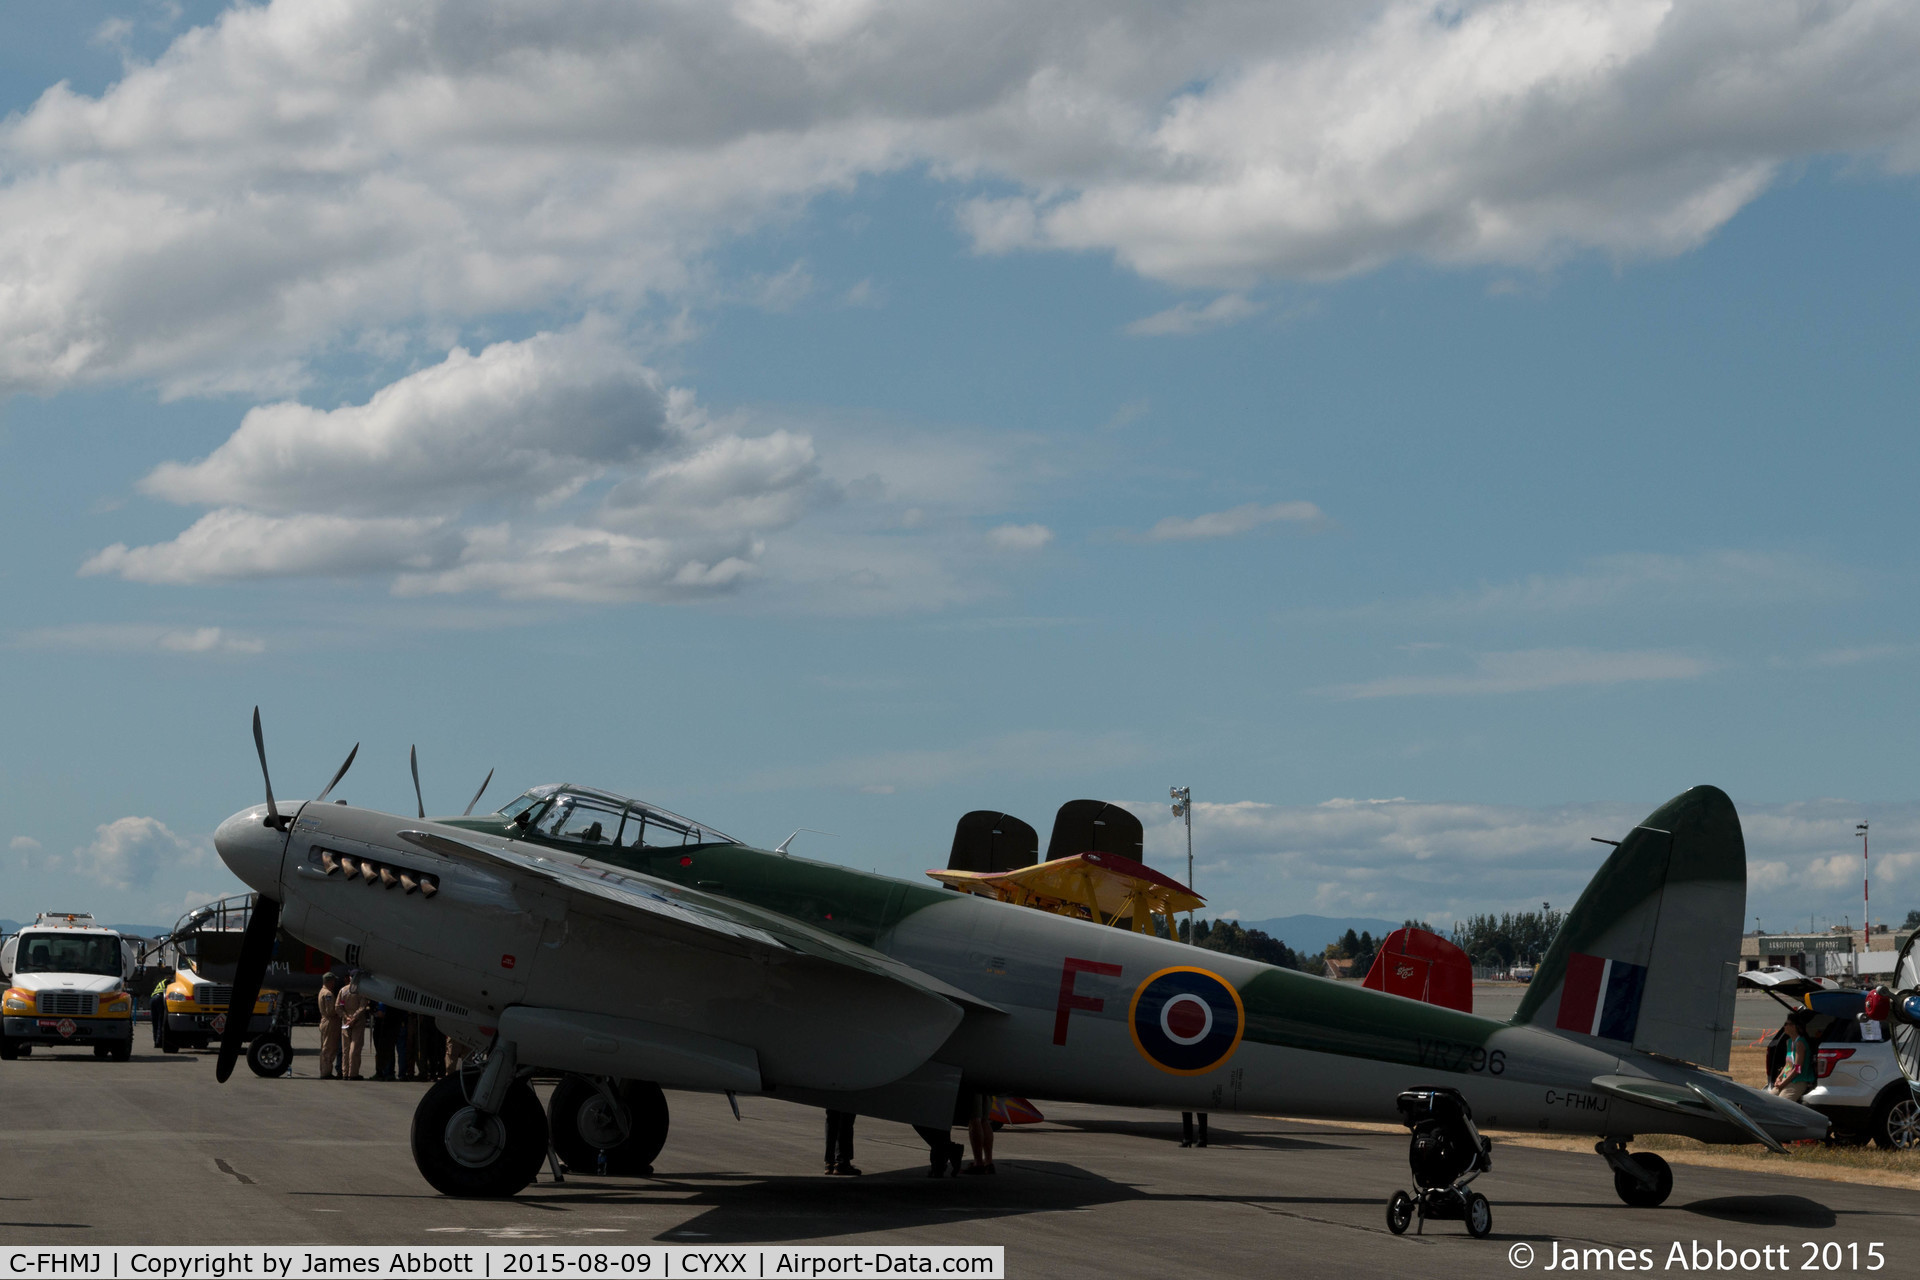 C-FHMJ, 1948 De Havilland DH-98 Mosquito B.35 C/N Not found VR796, On display at the 2015 Abbotsford Airshow